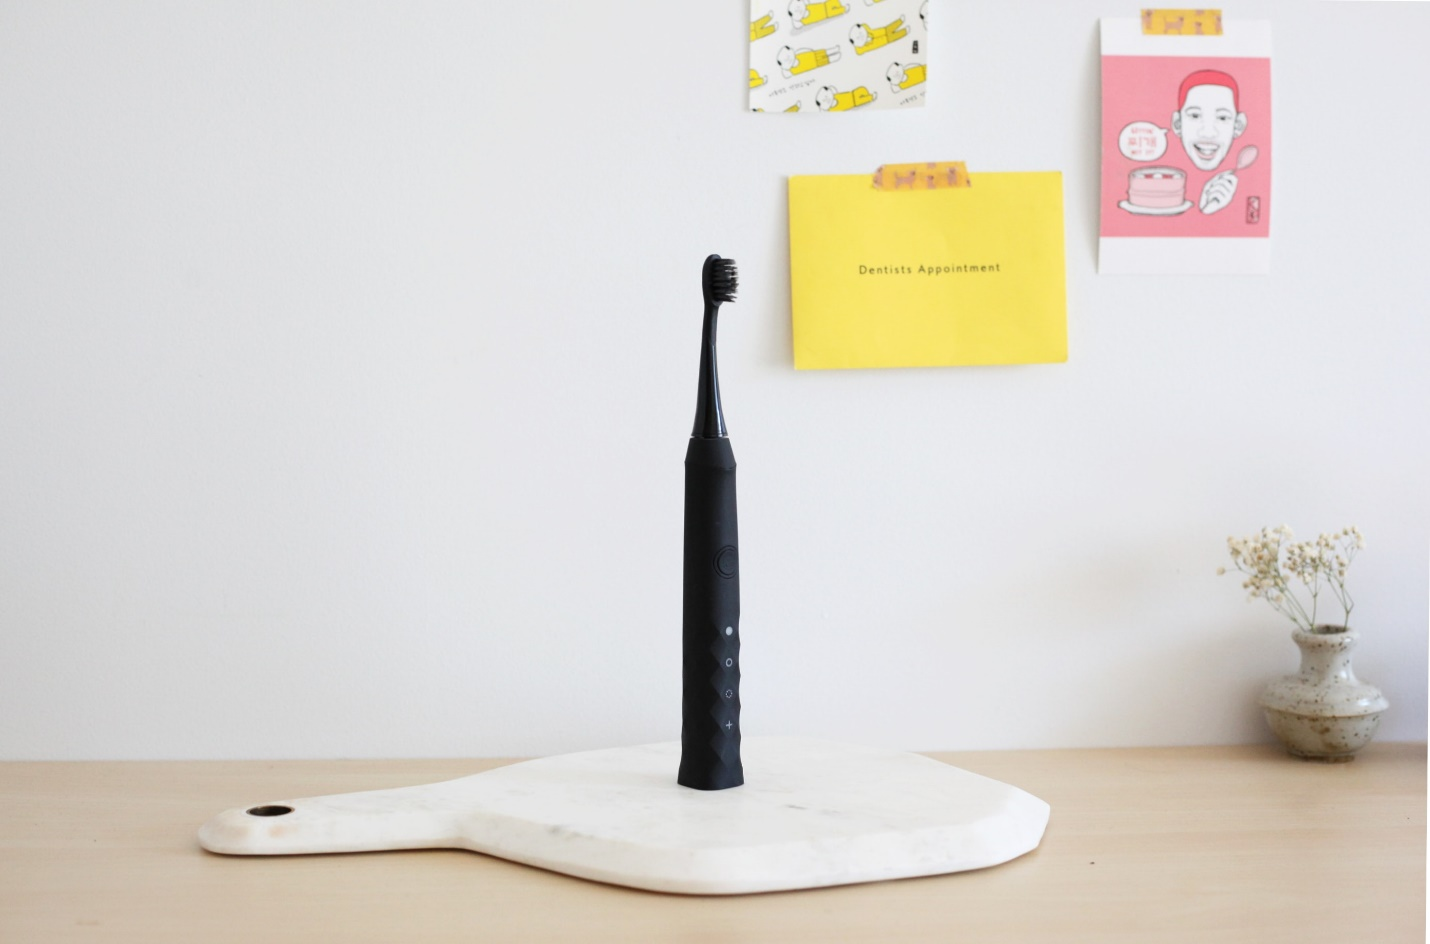 A smart sonic electric toothbrush